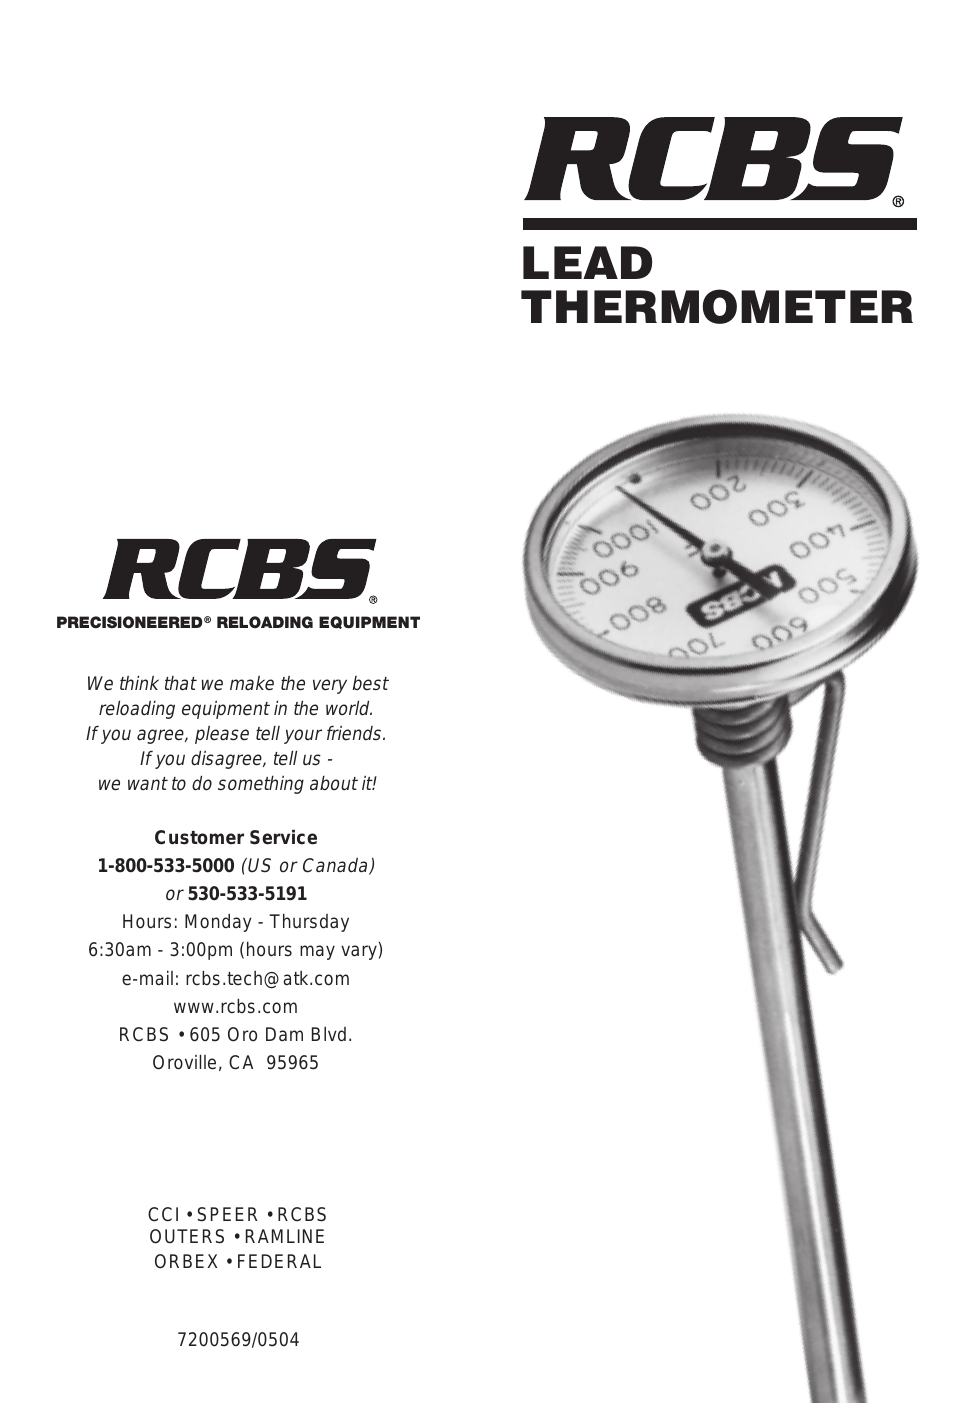 Lead Thermometer